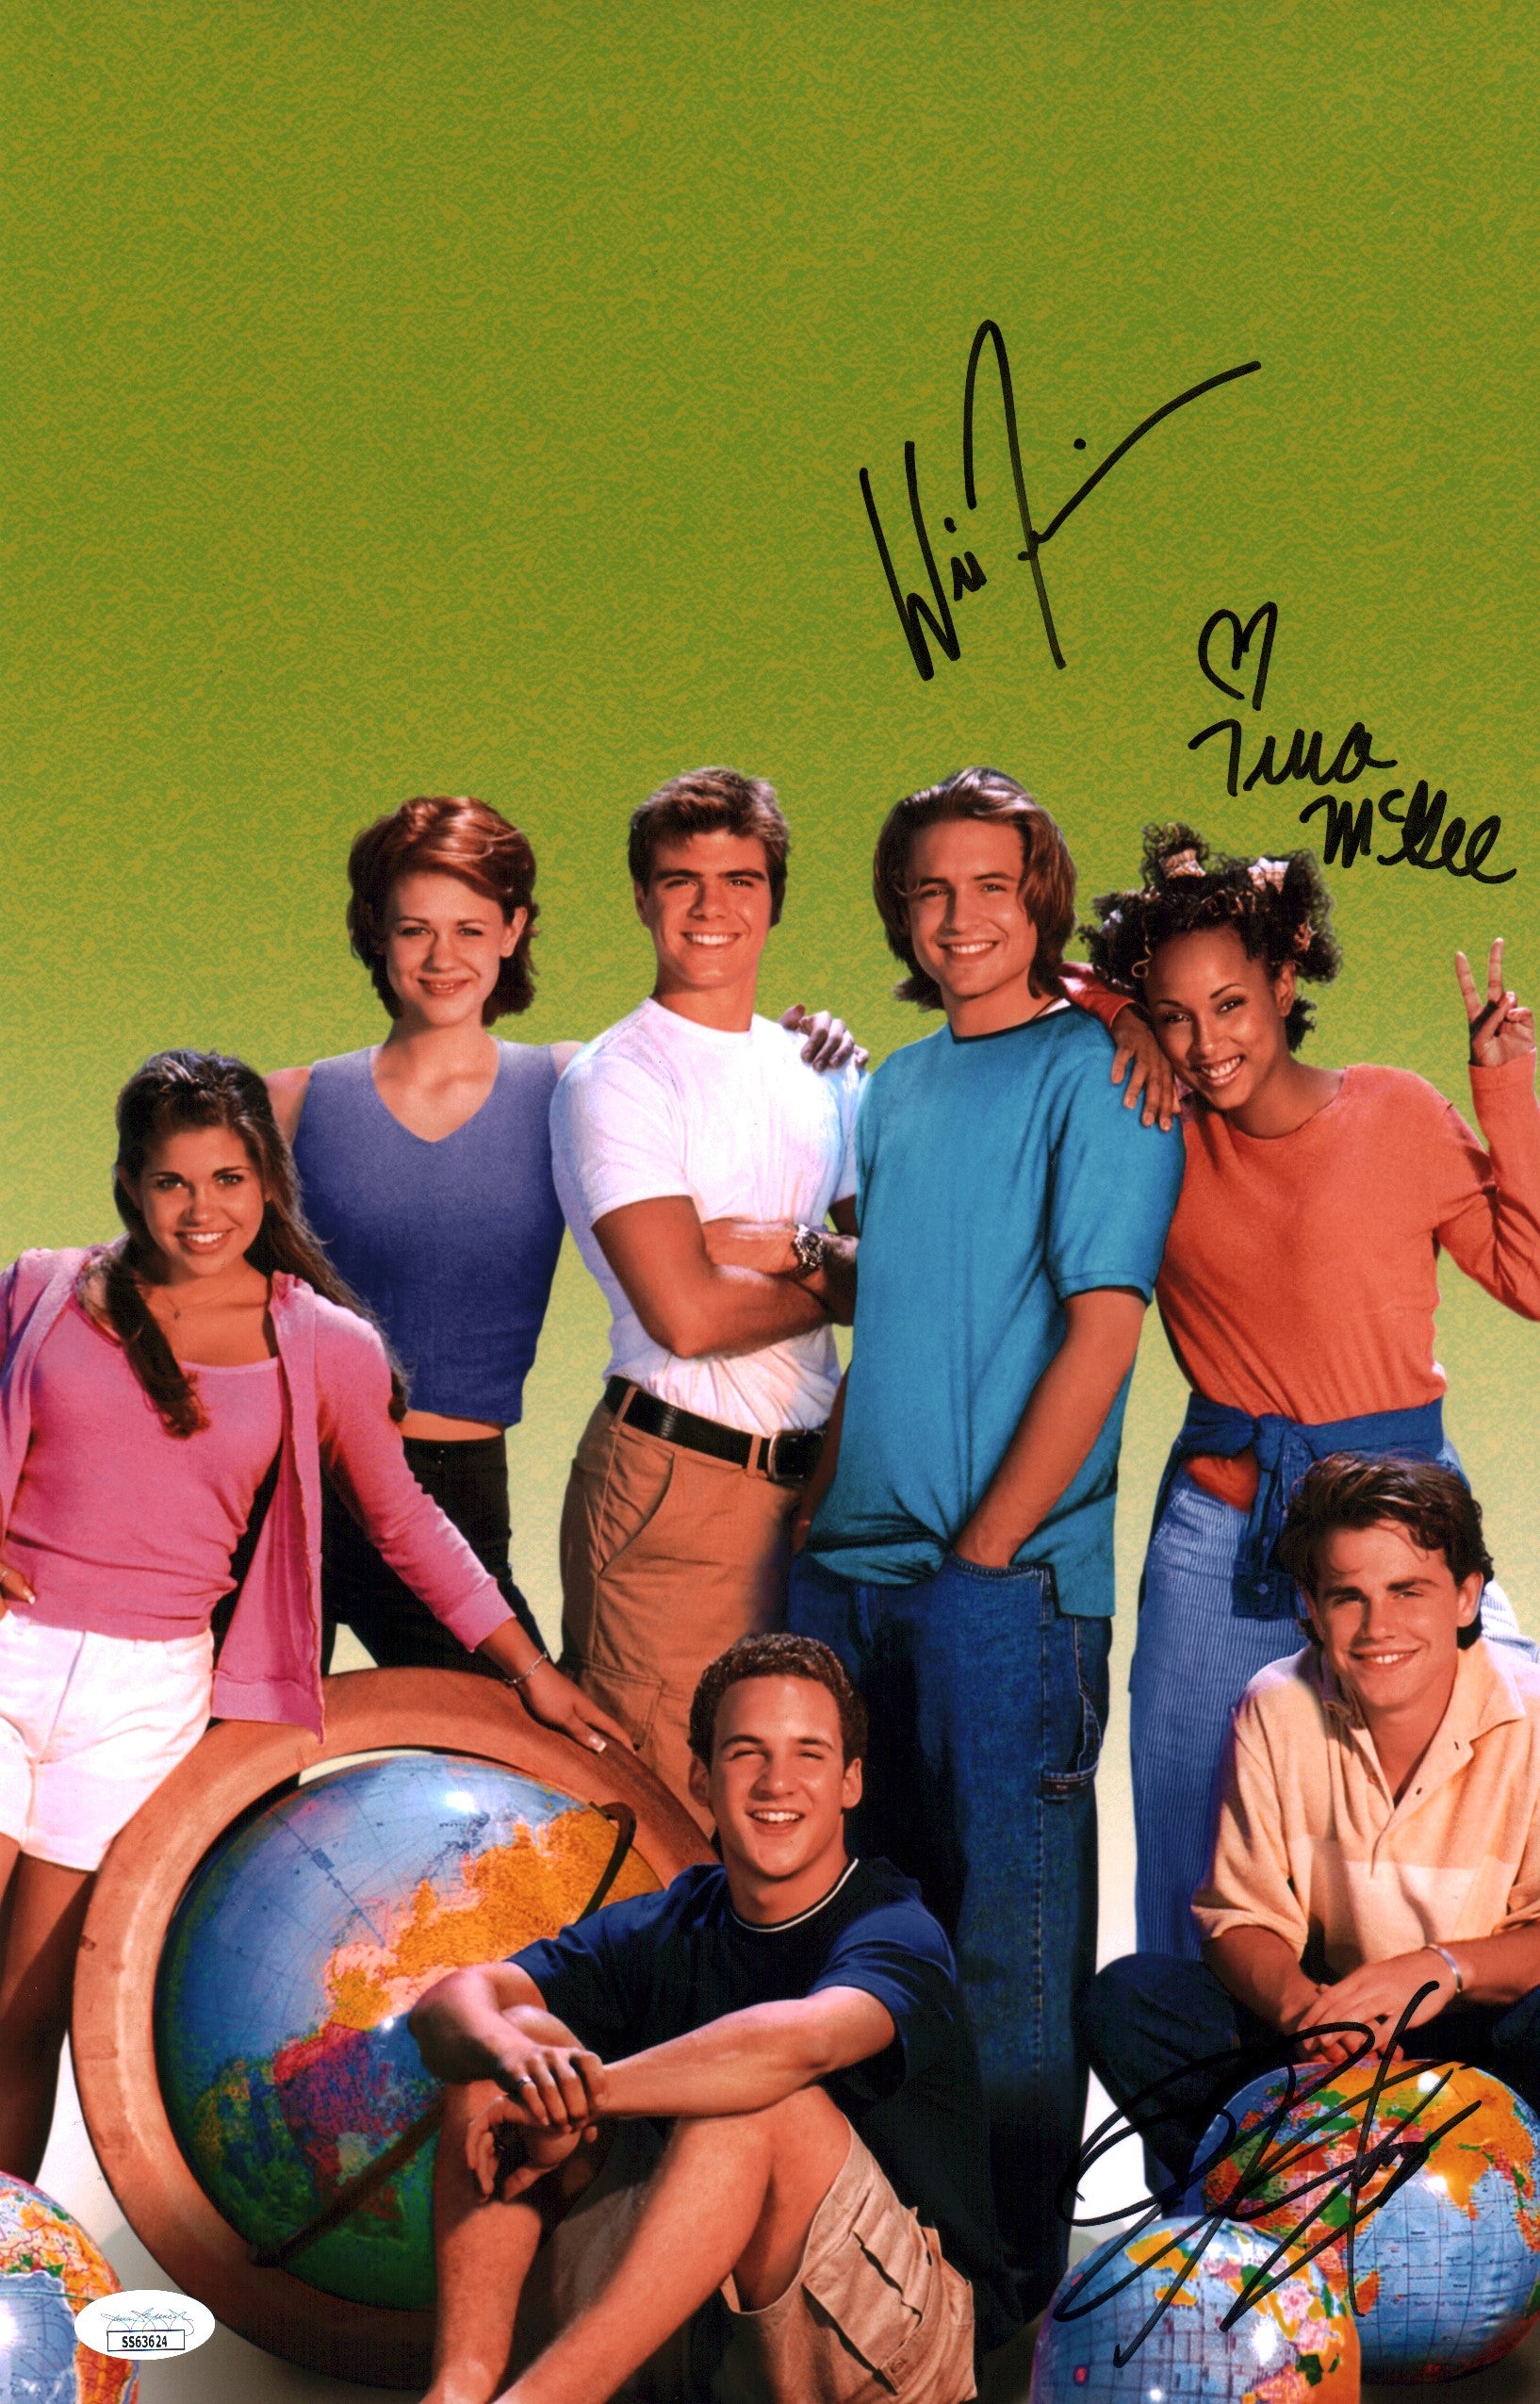 Boy Meets World 11x17 Photo Poster Signed Autograph Friedle Strong McGee JSA Certified COA